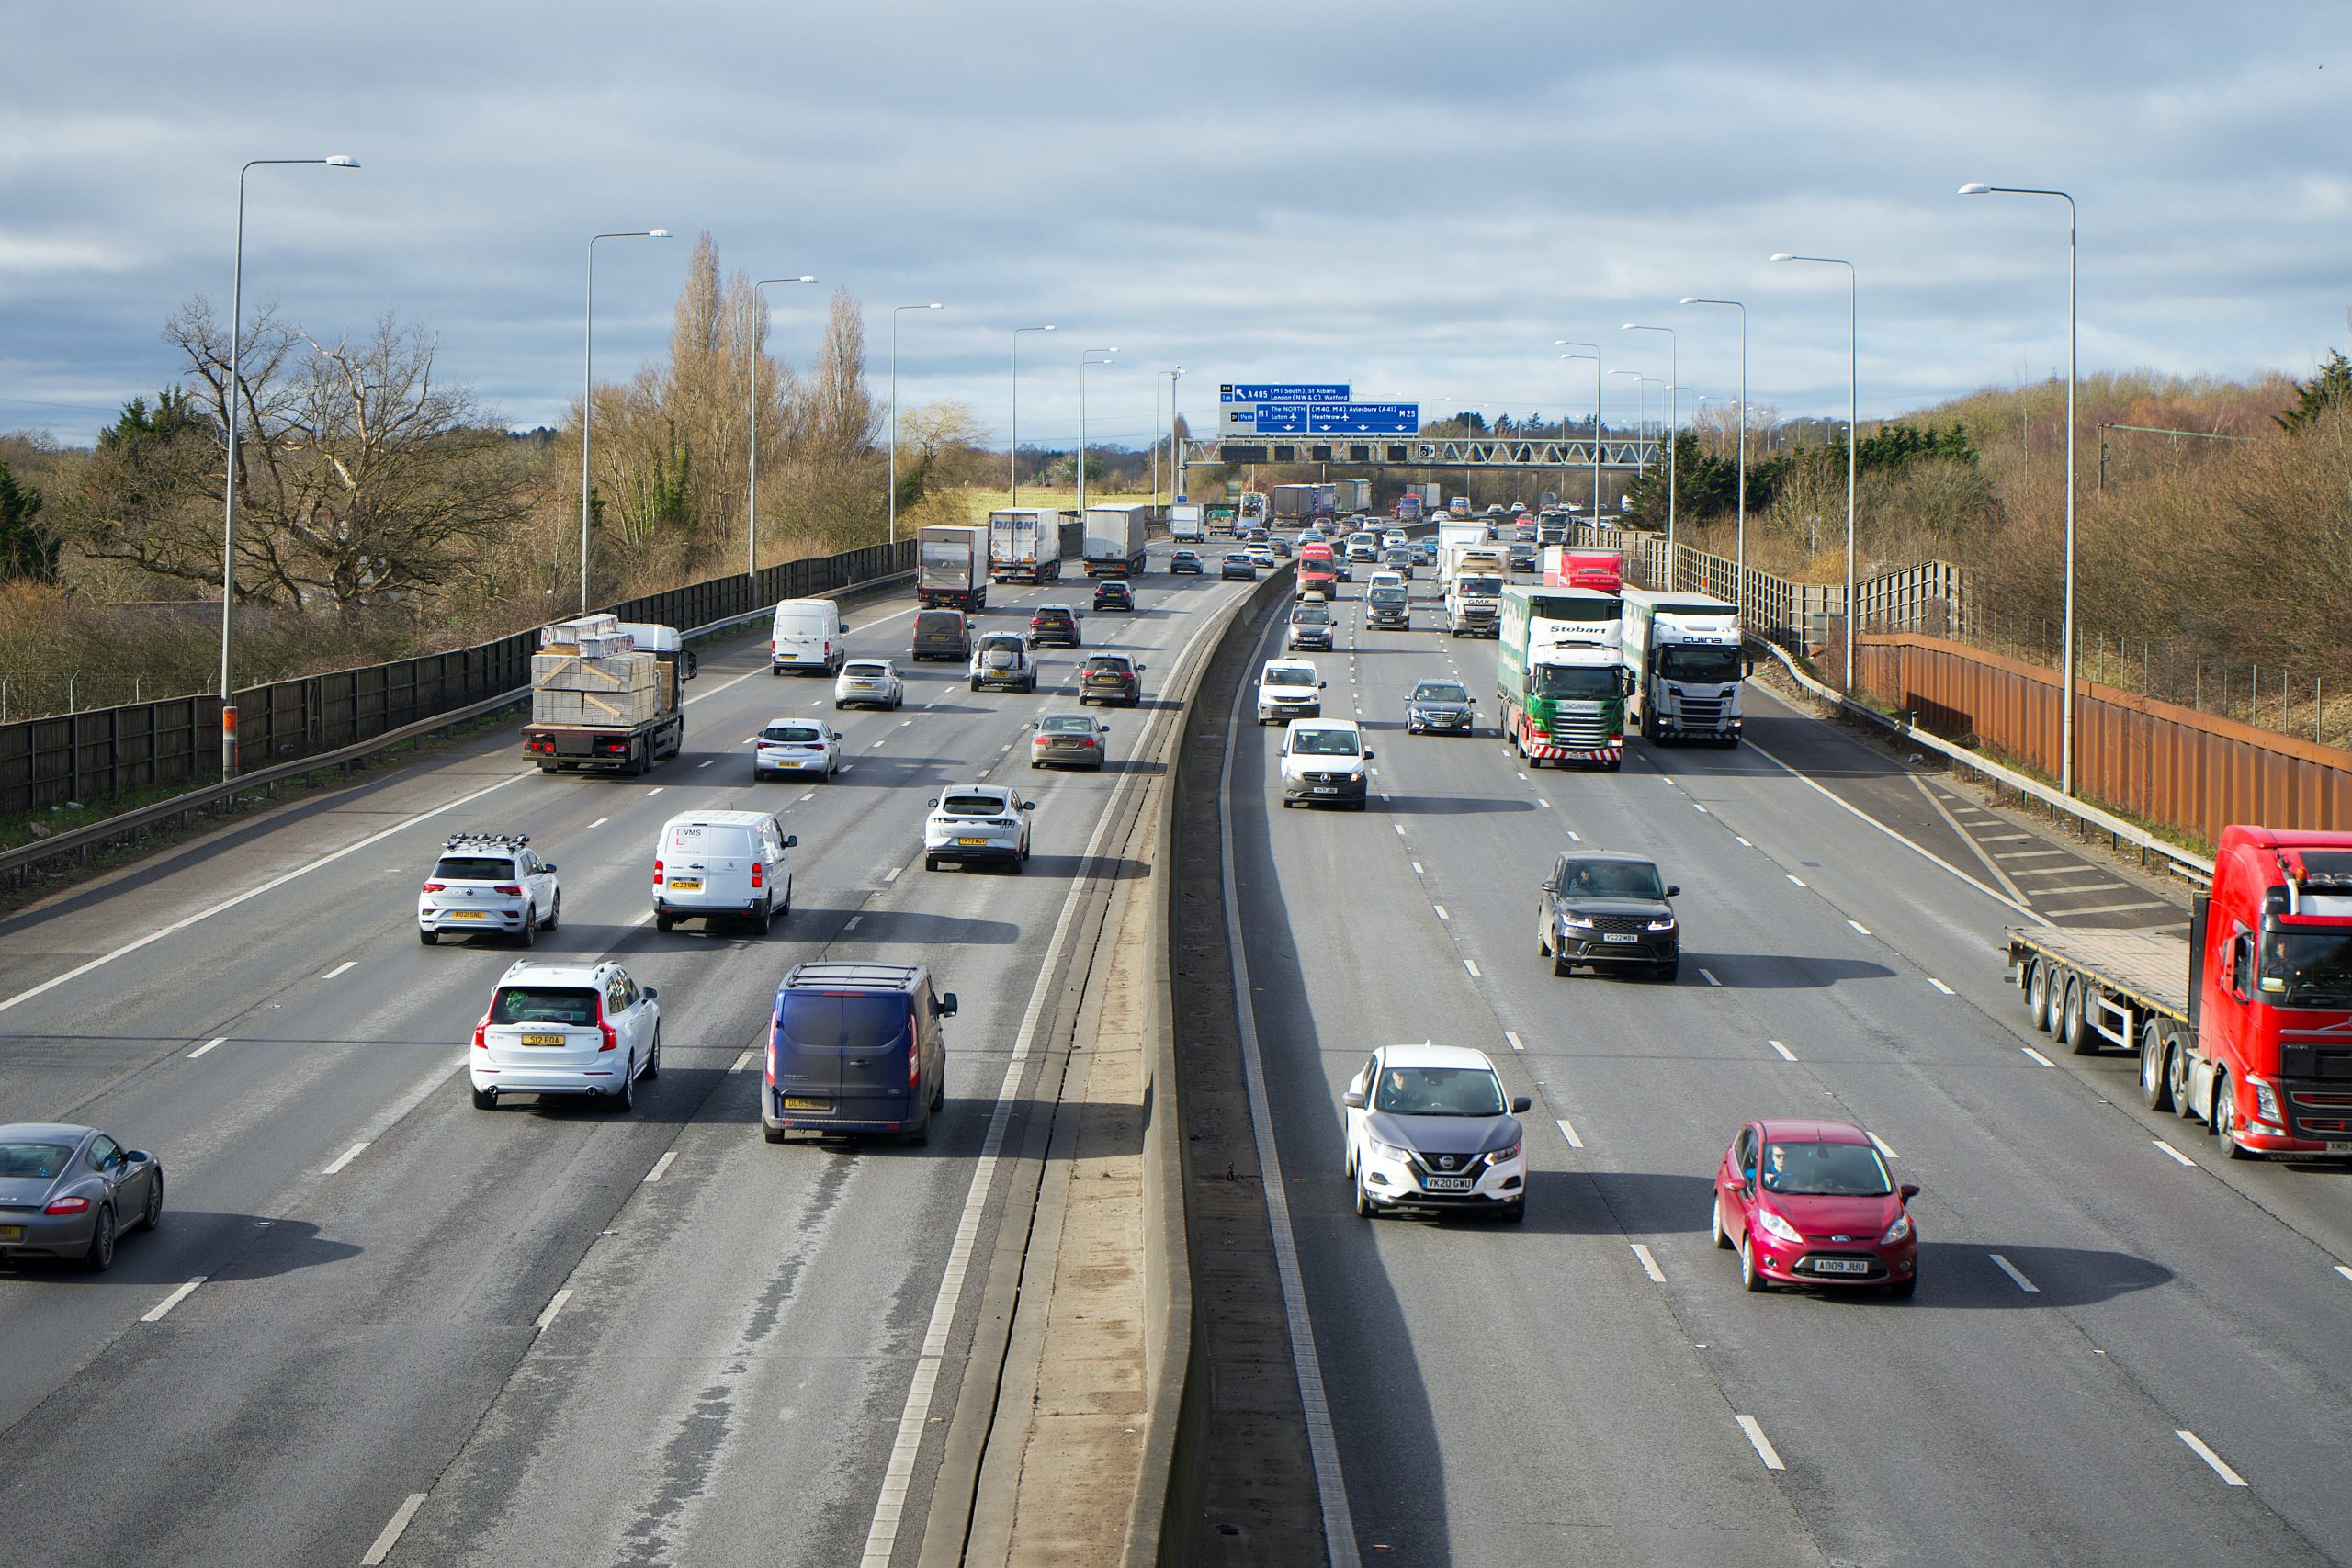 Price of Next Year's One-Day Motorway Vignette Revealed